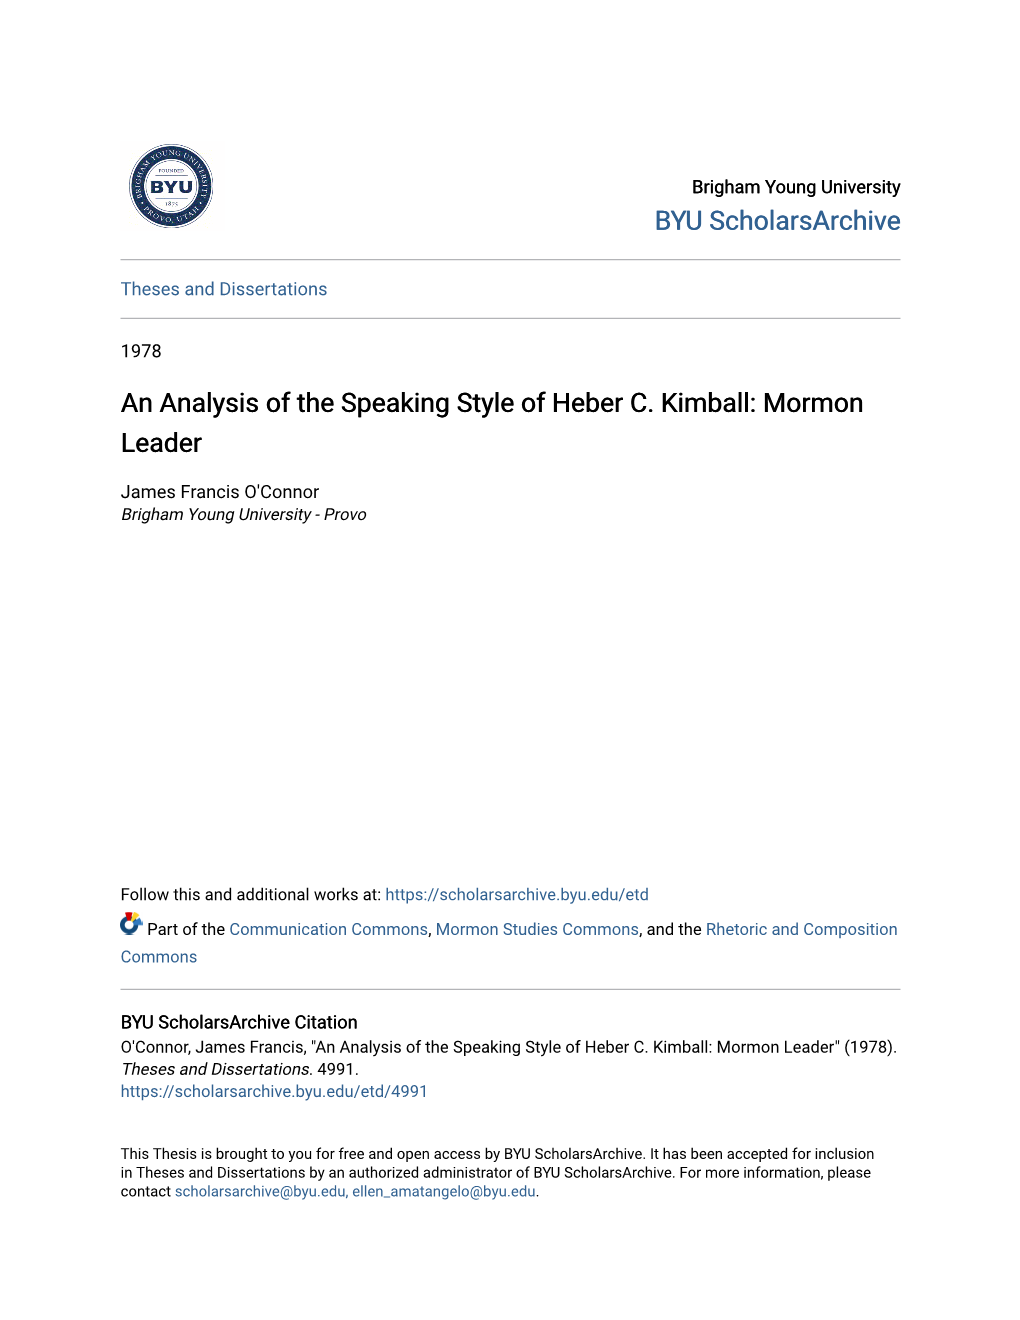 An Analysis of the Speaking Style of Heber C. Kimball: Mormon Leader